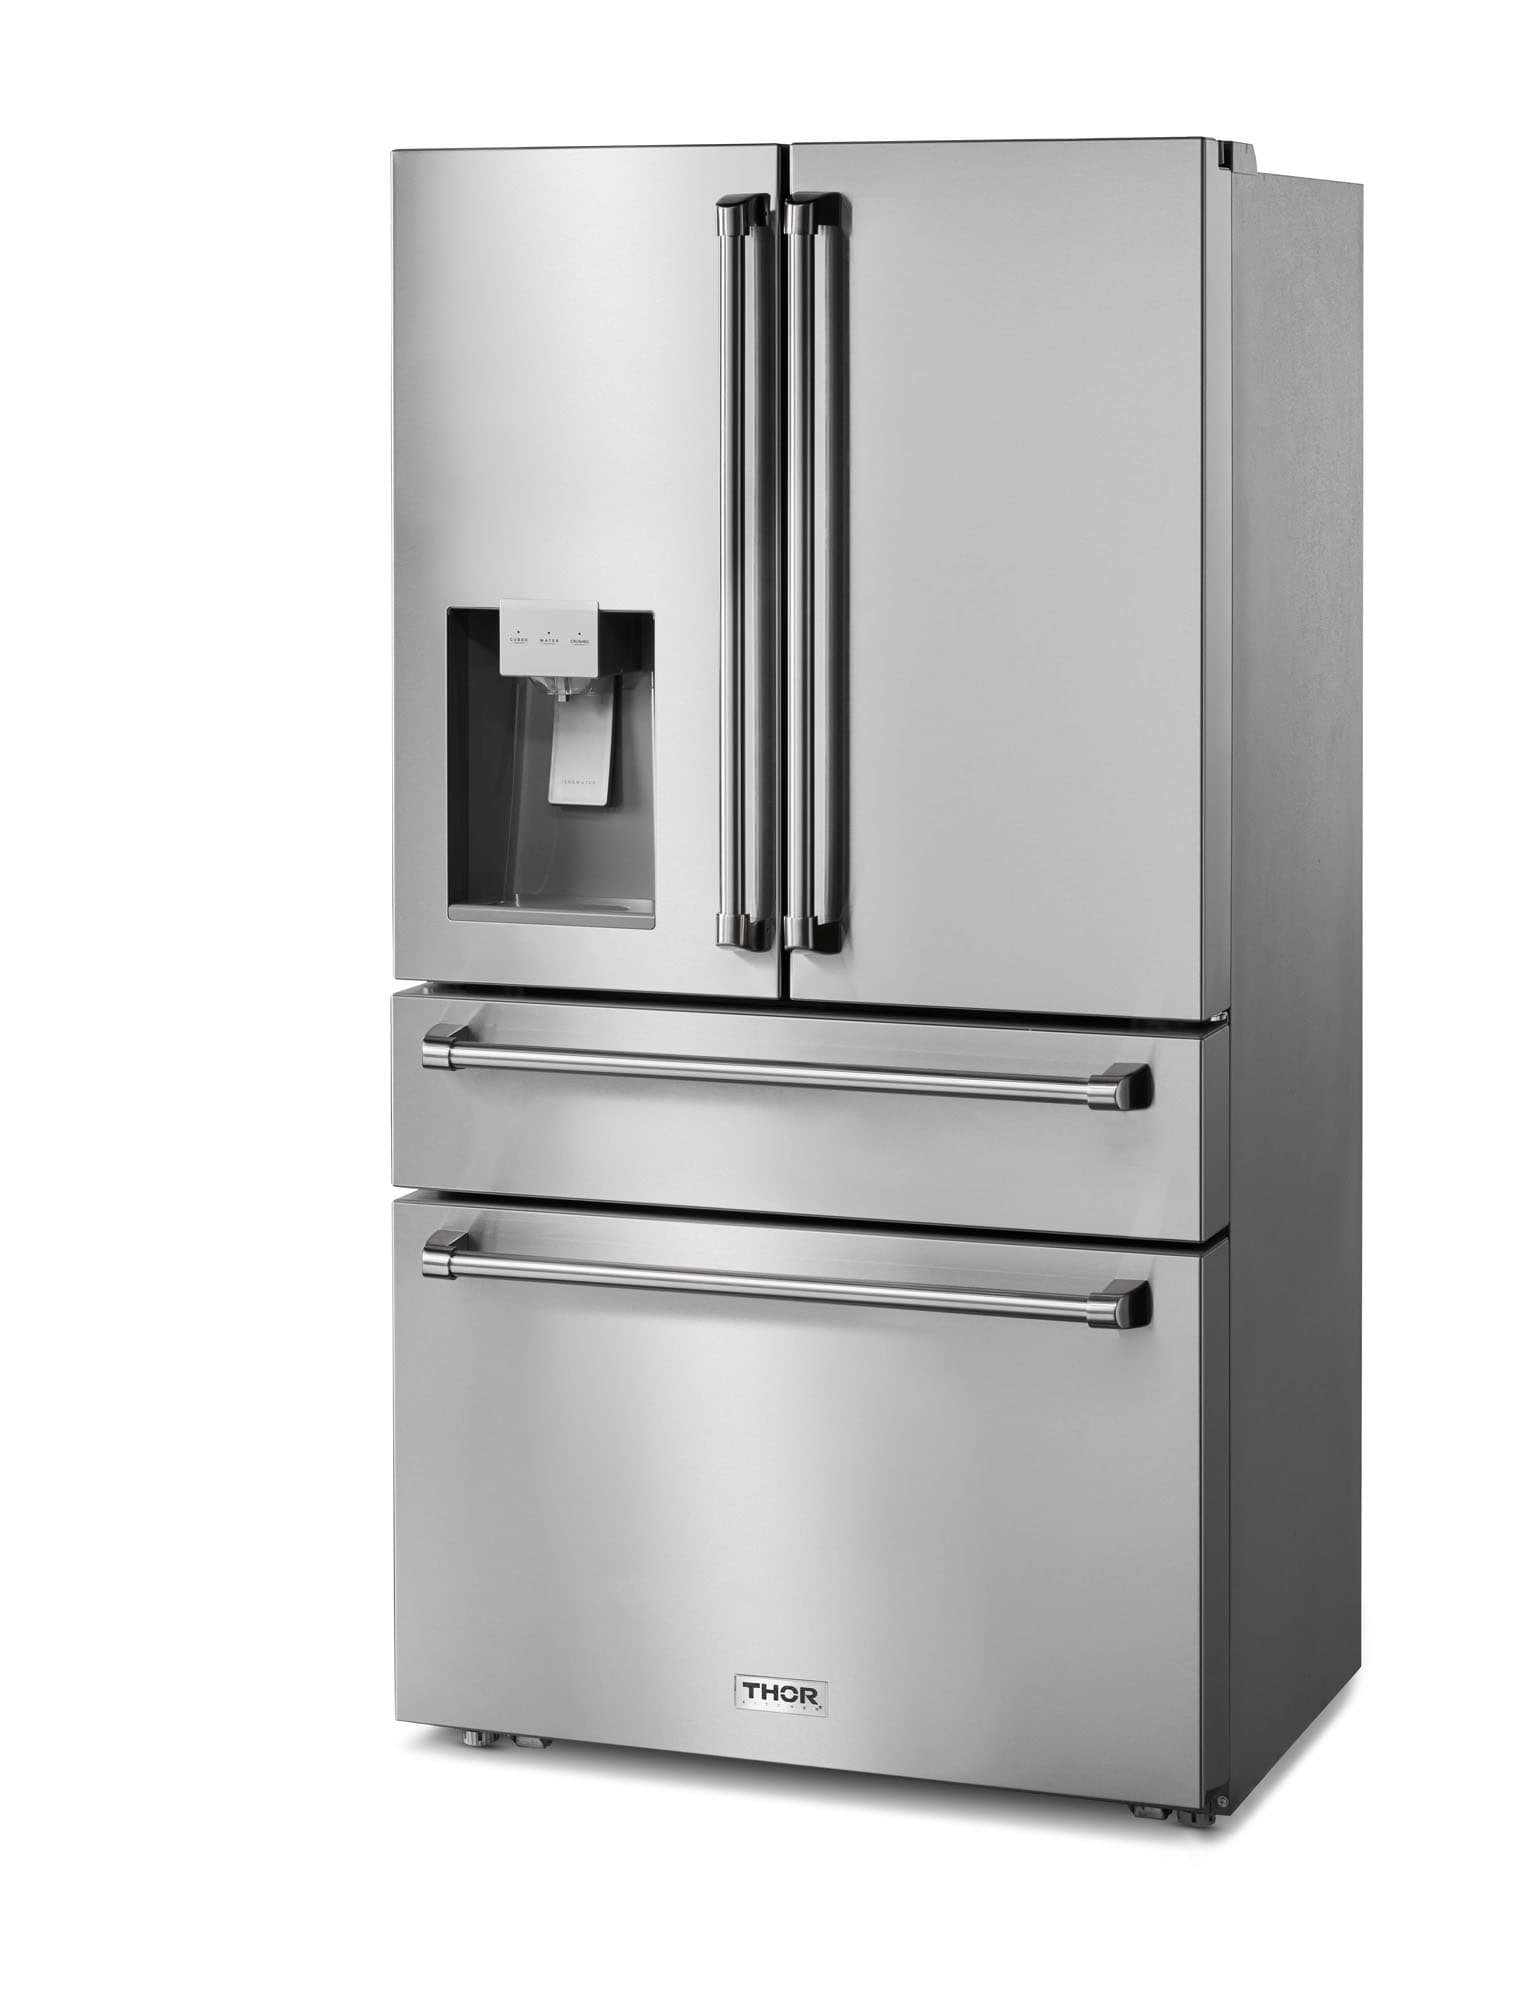 Thor Kitchen 36-Inch Professional French Door Refrigerator with Ice and Water Dispenser (TRF3601FD) Wine Coolers Empire